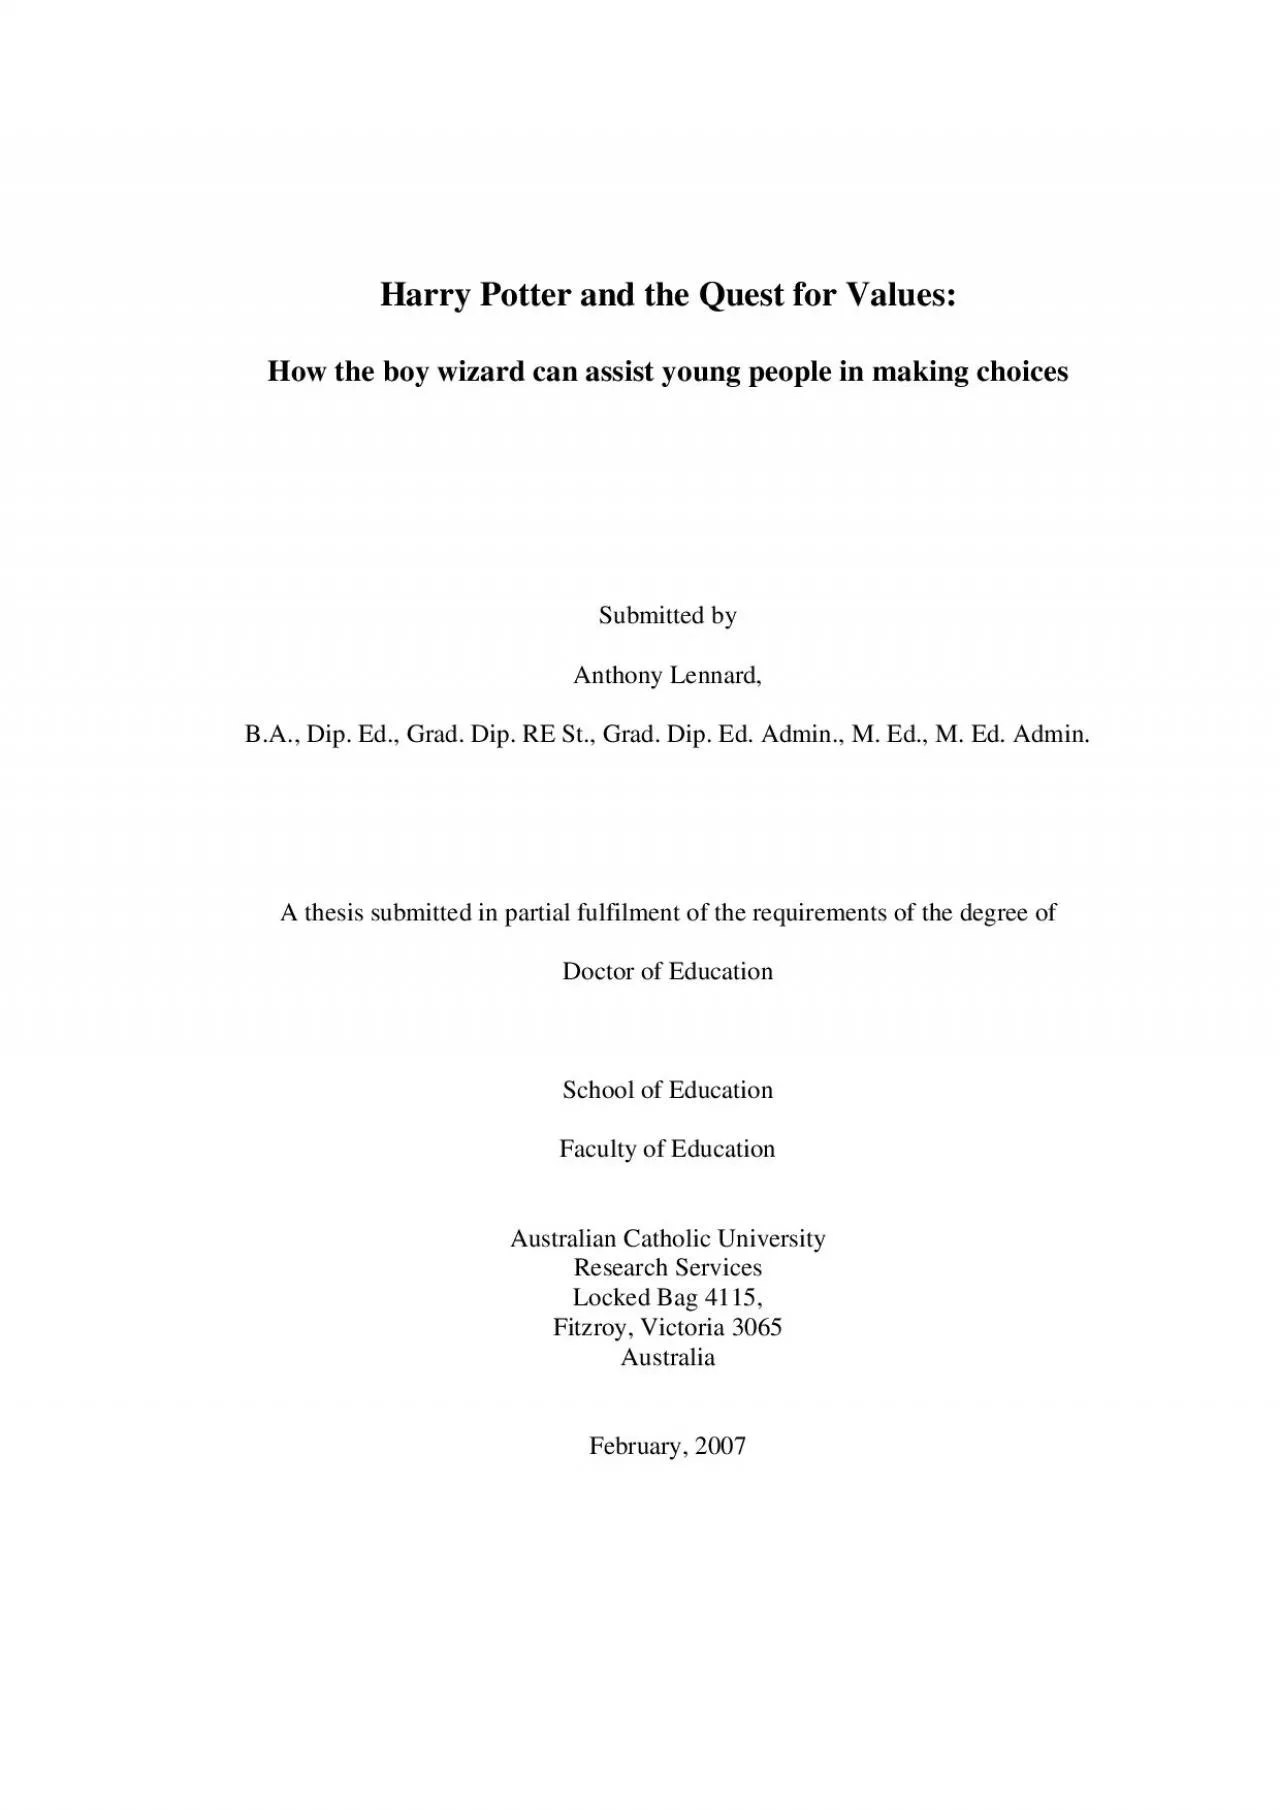 Harry Potter and the Quest for Values How the boy wizard can assist y